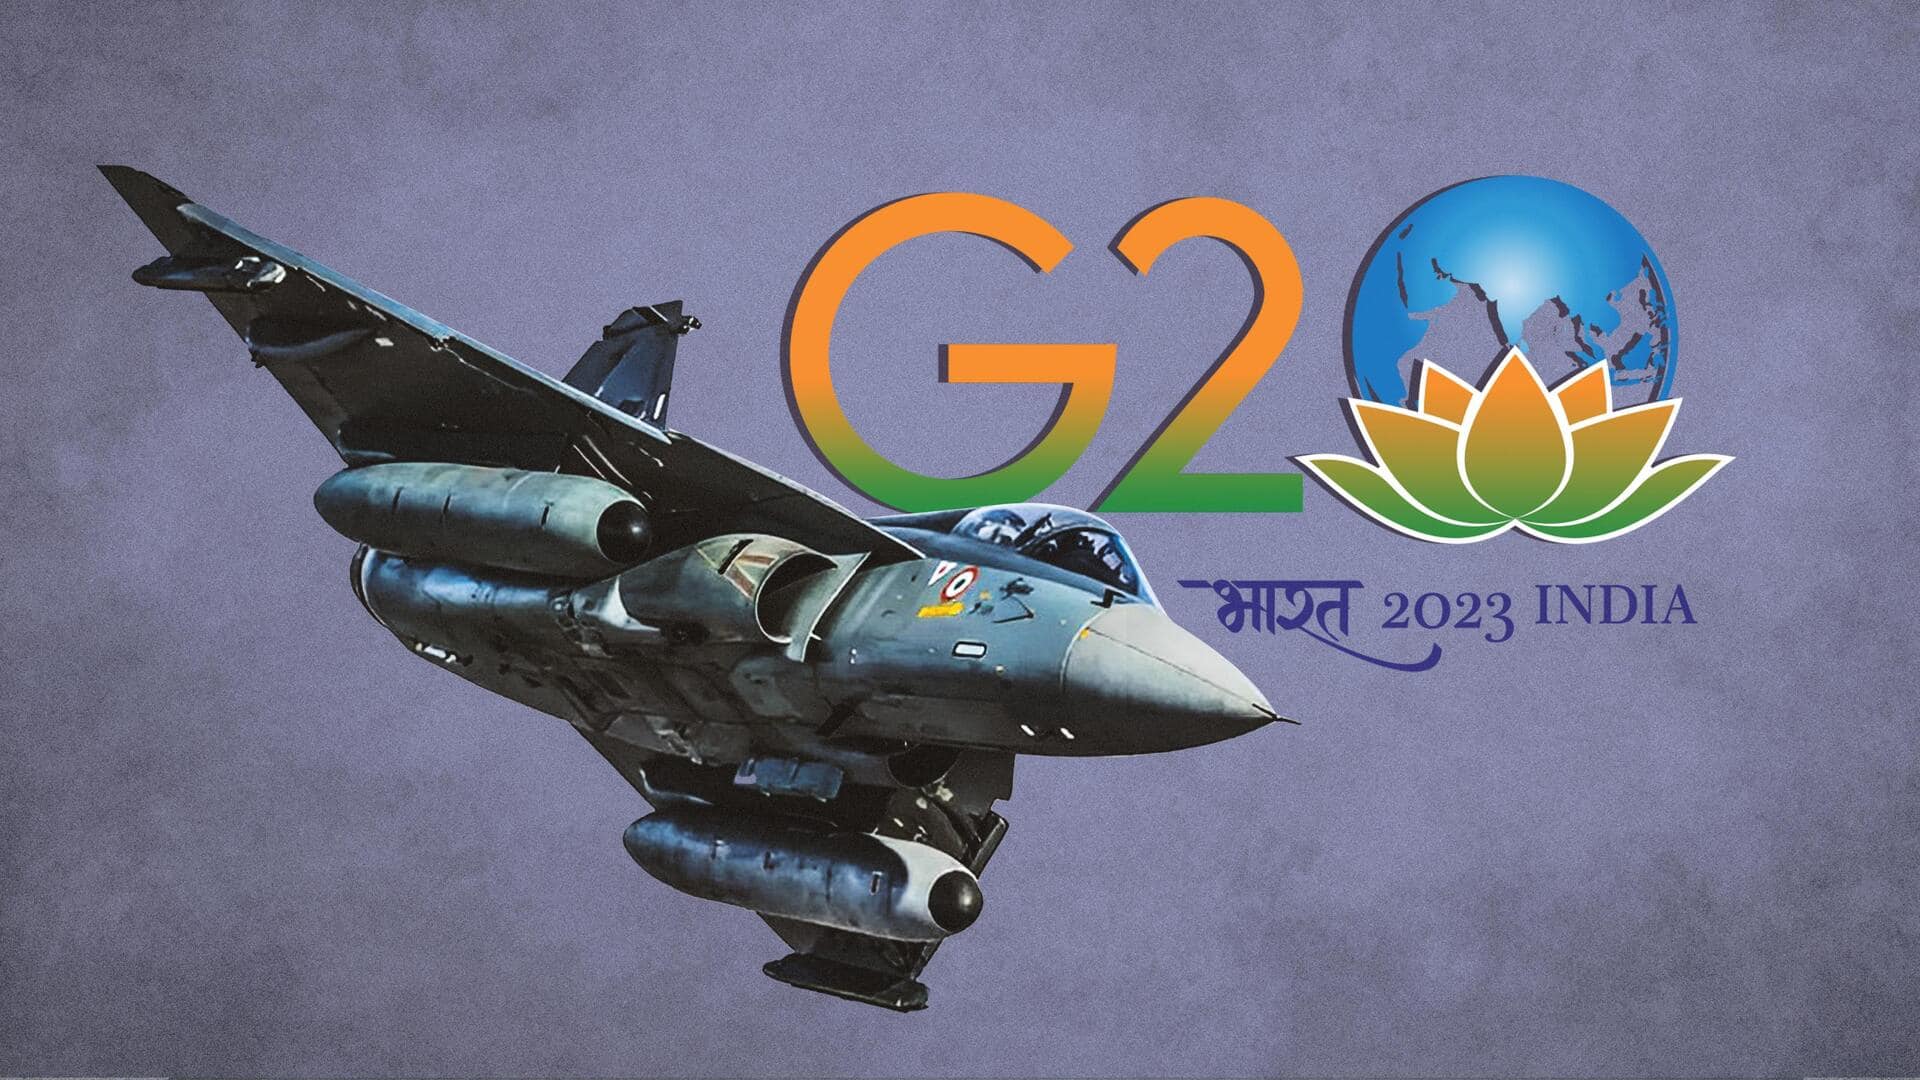 Everything about Delhi's multi-layered aerial security for G20 Summit